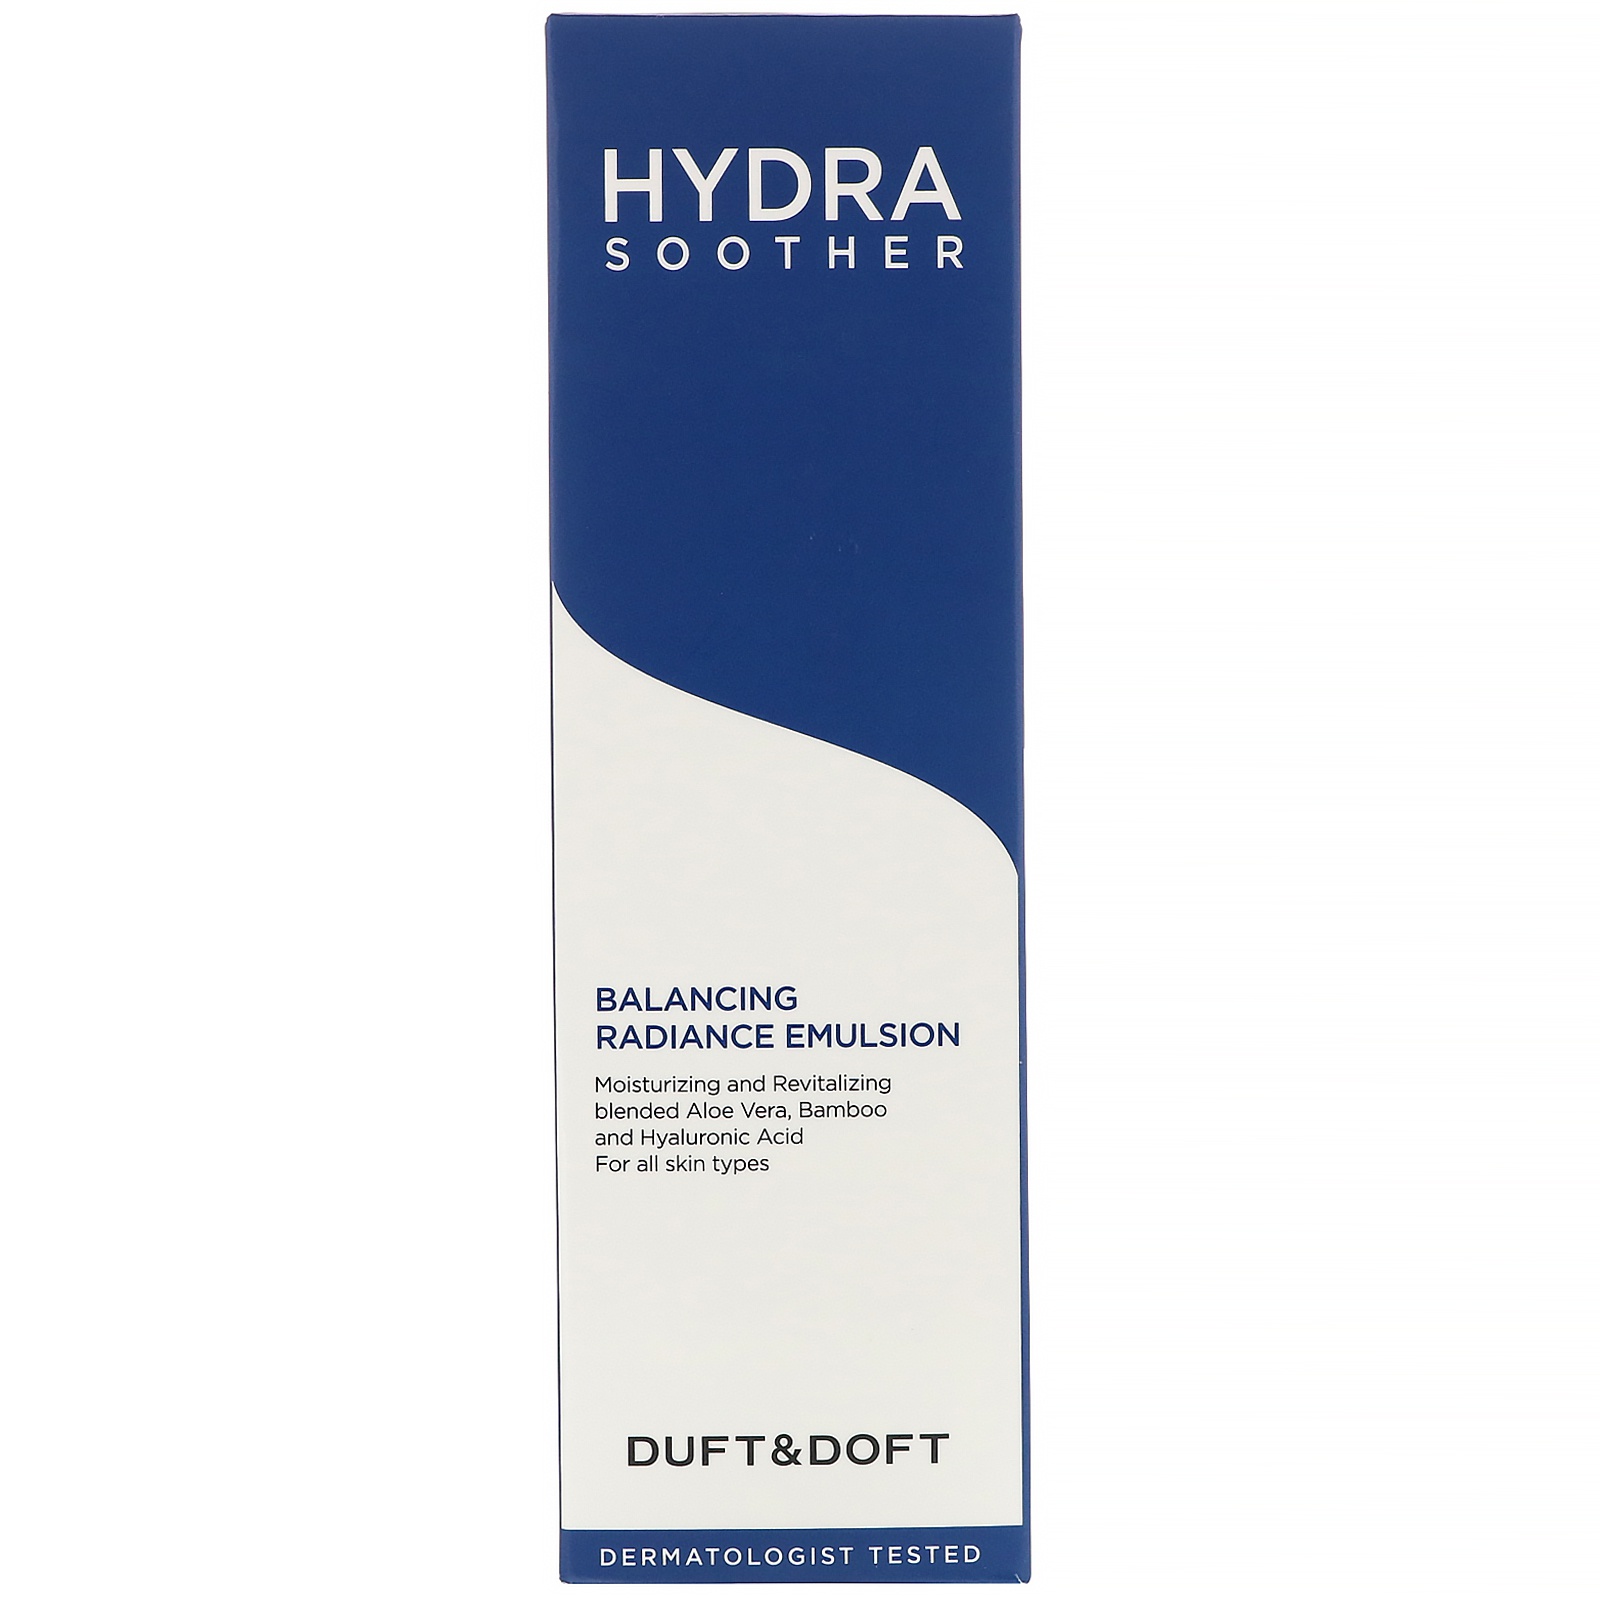 Duft & Doft Hydra Soother Balancing Radiance Emulsion